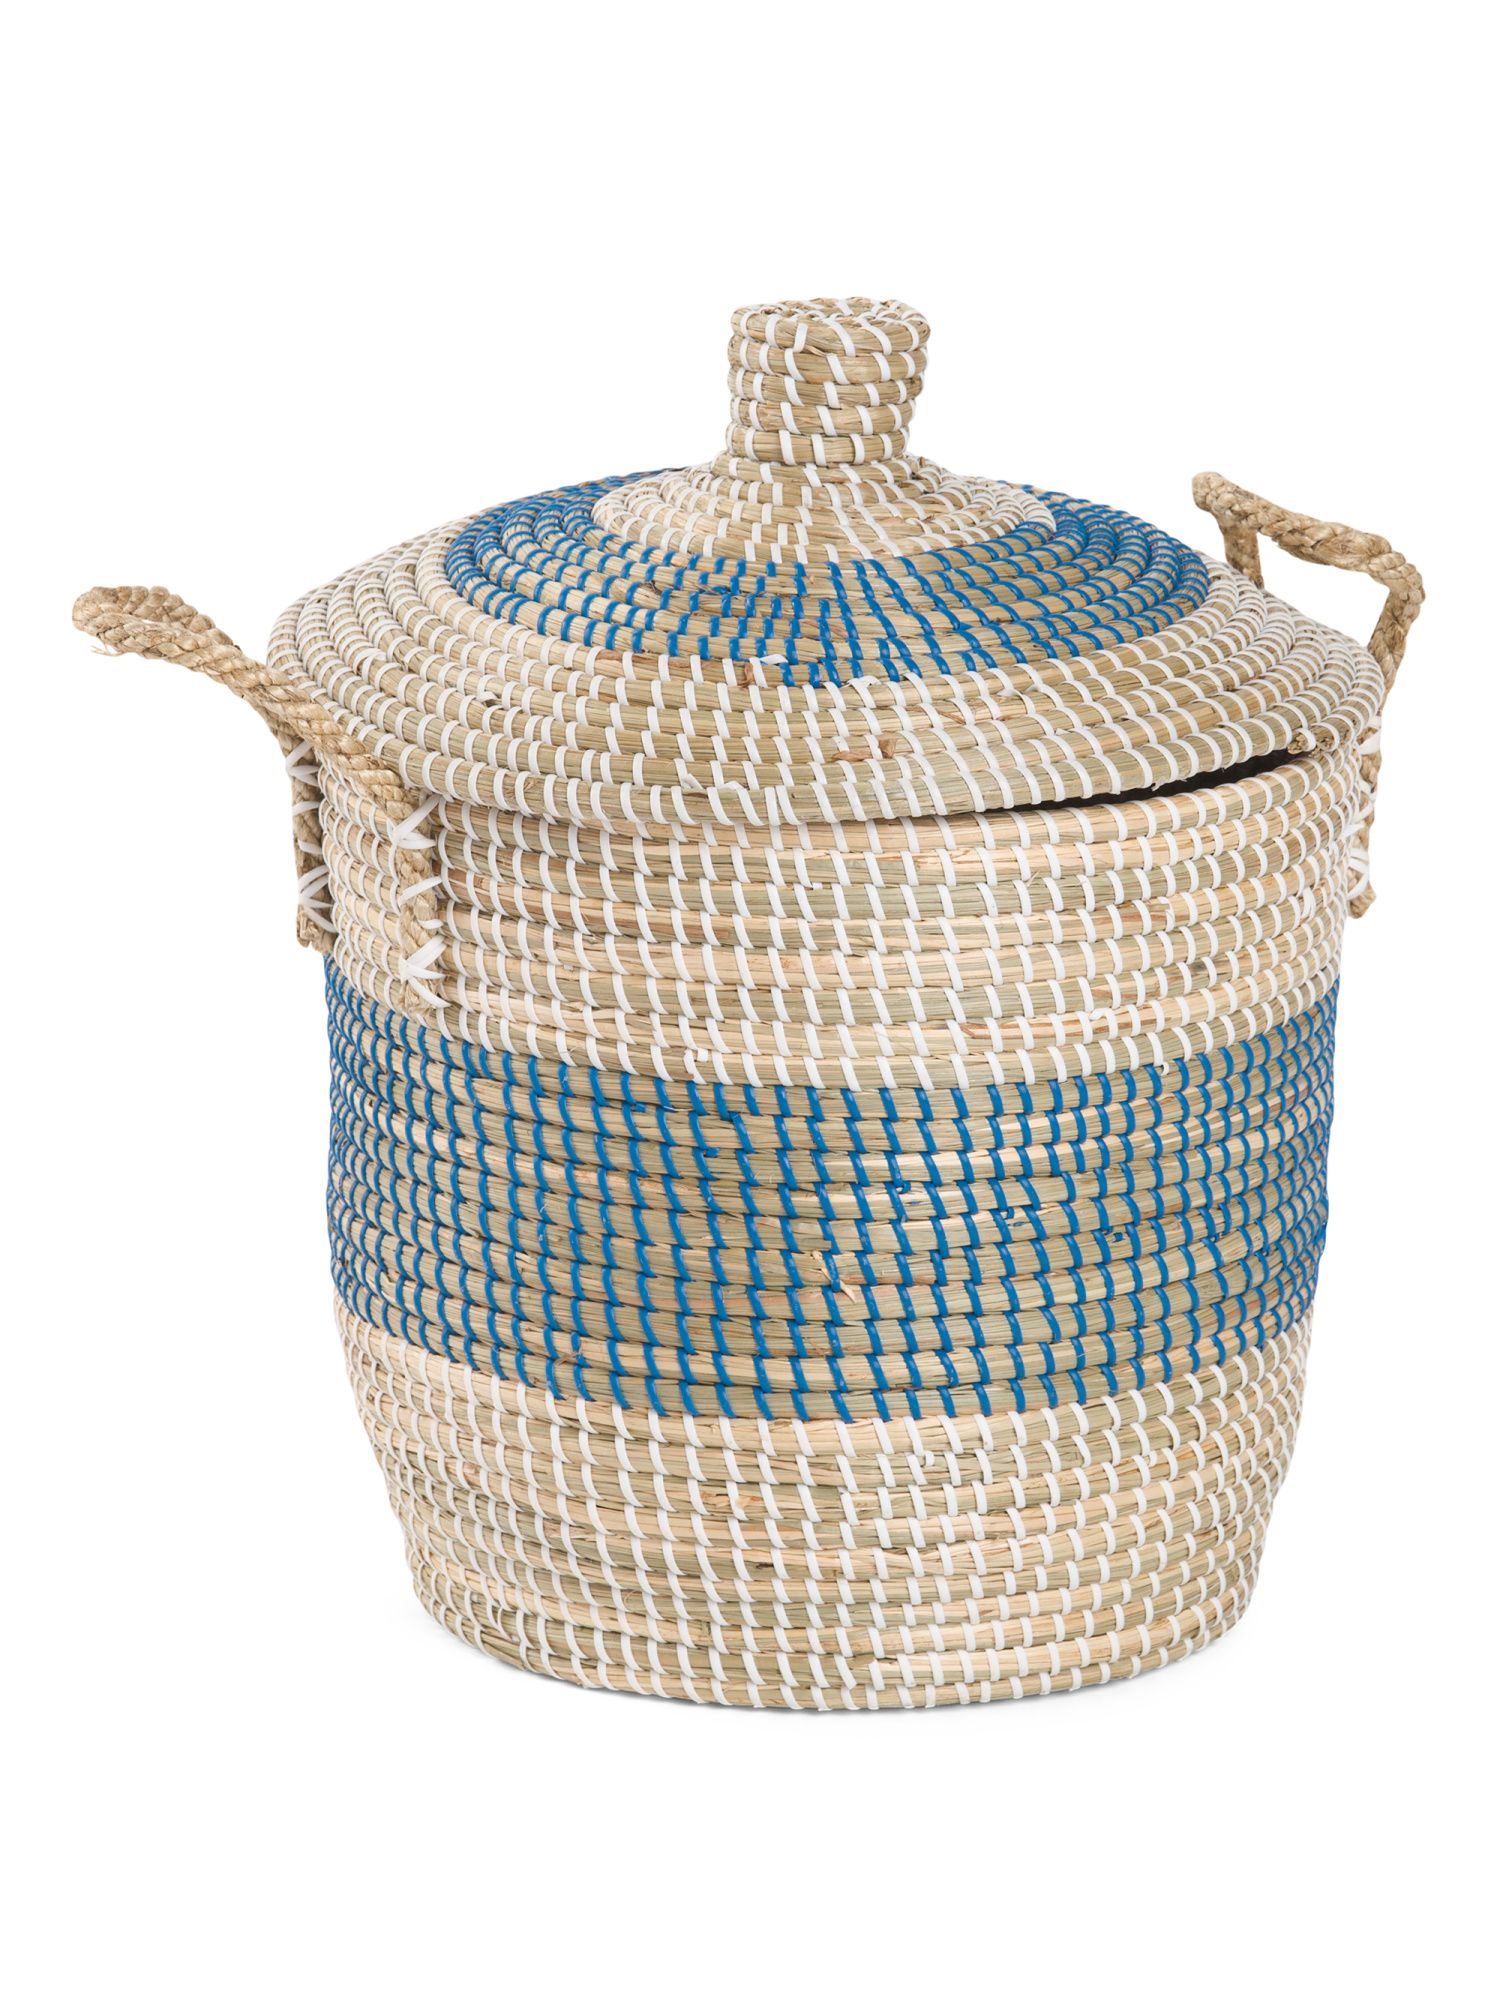 Small Striped Round Hamper With Rope Handles | TJ Maxx